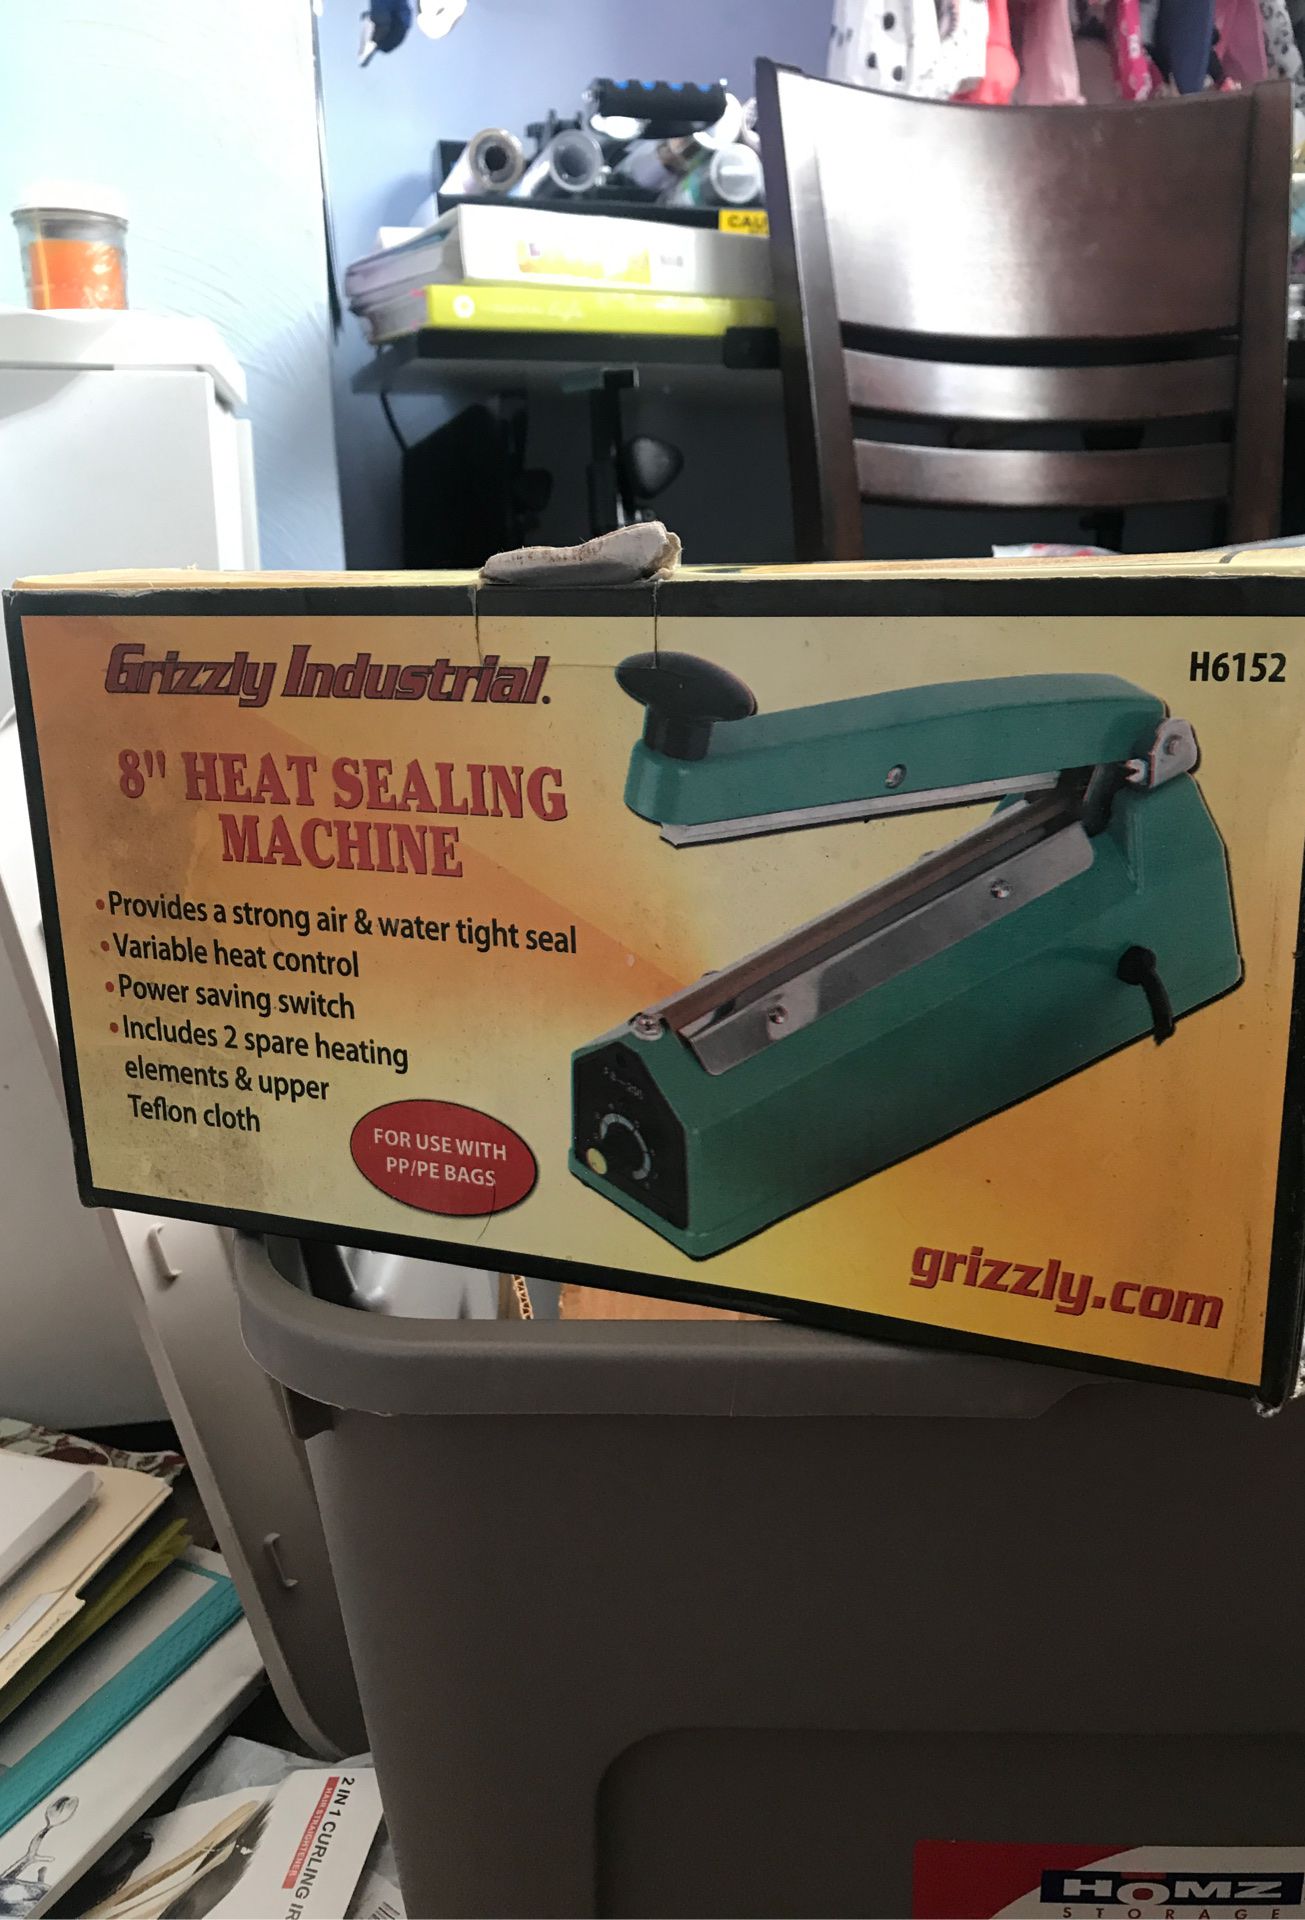 Grizzly industrial 8” Heat Sealing Machine